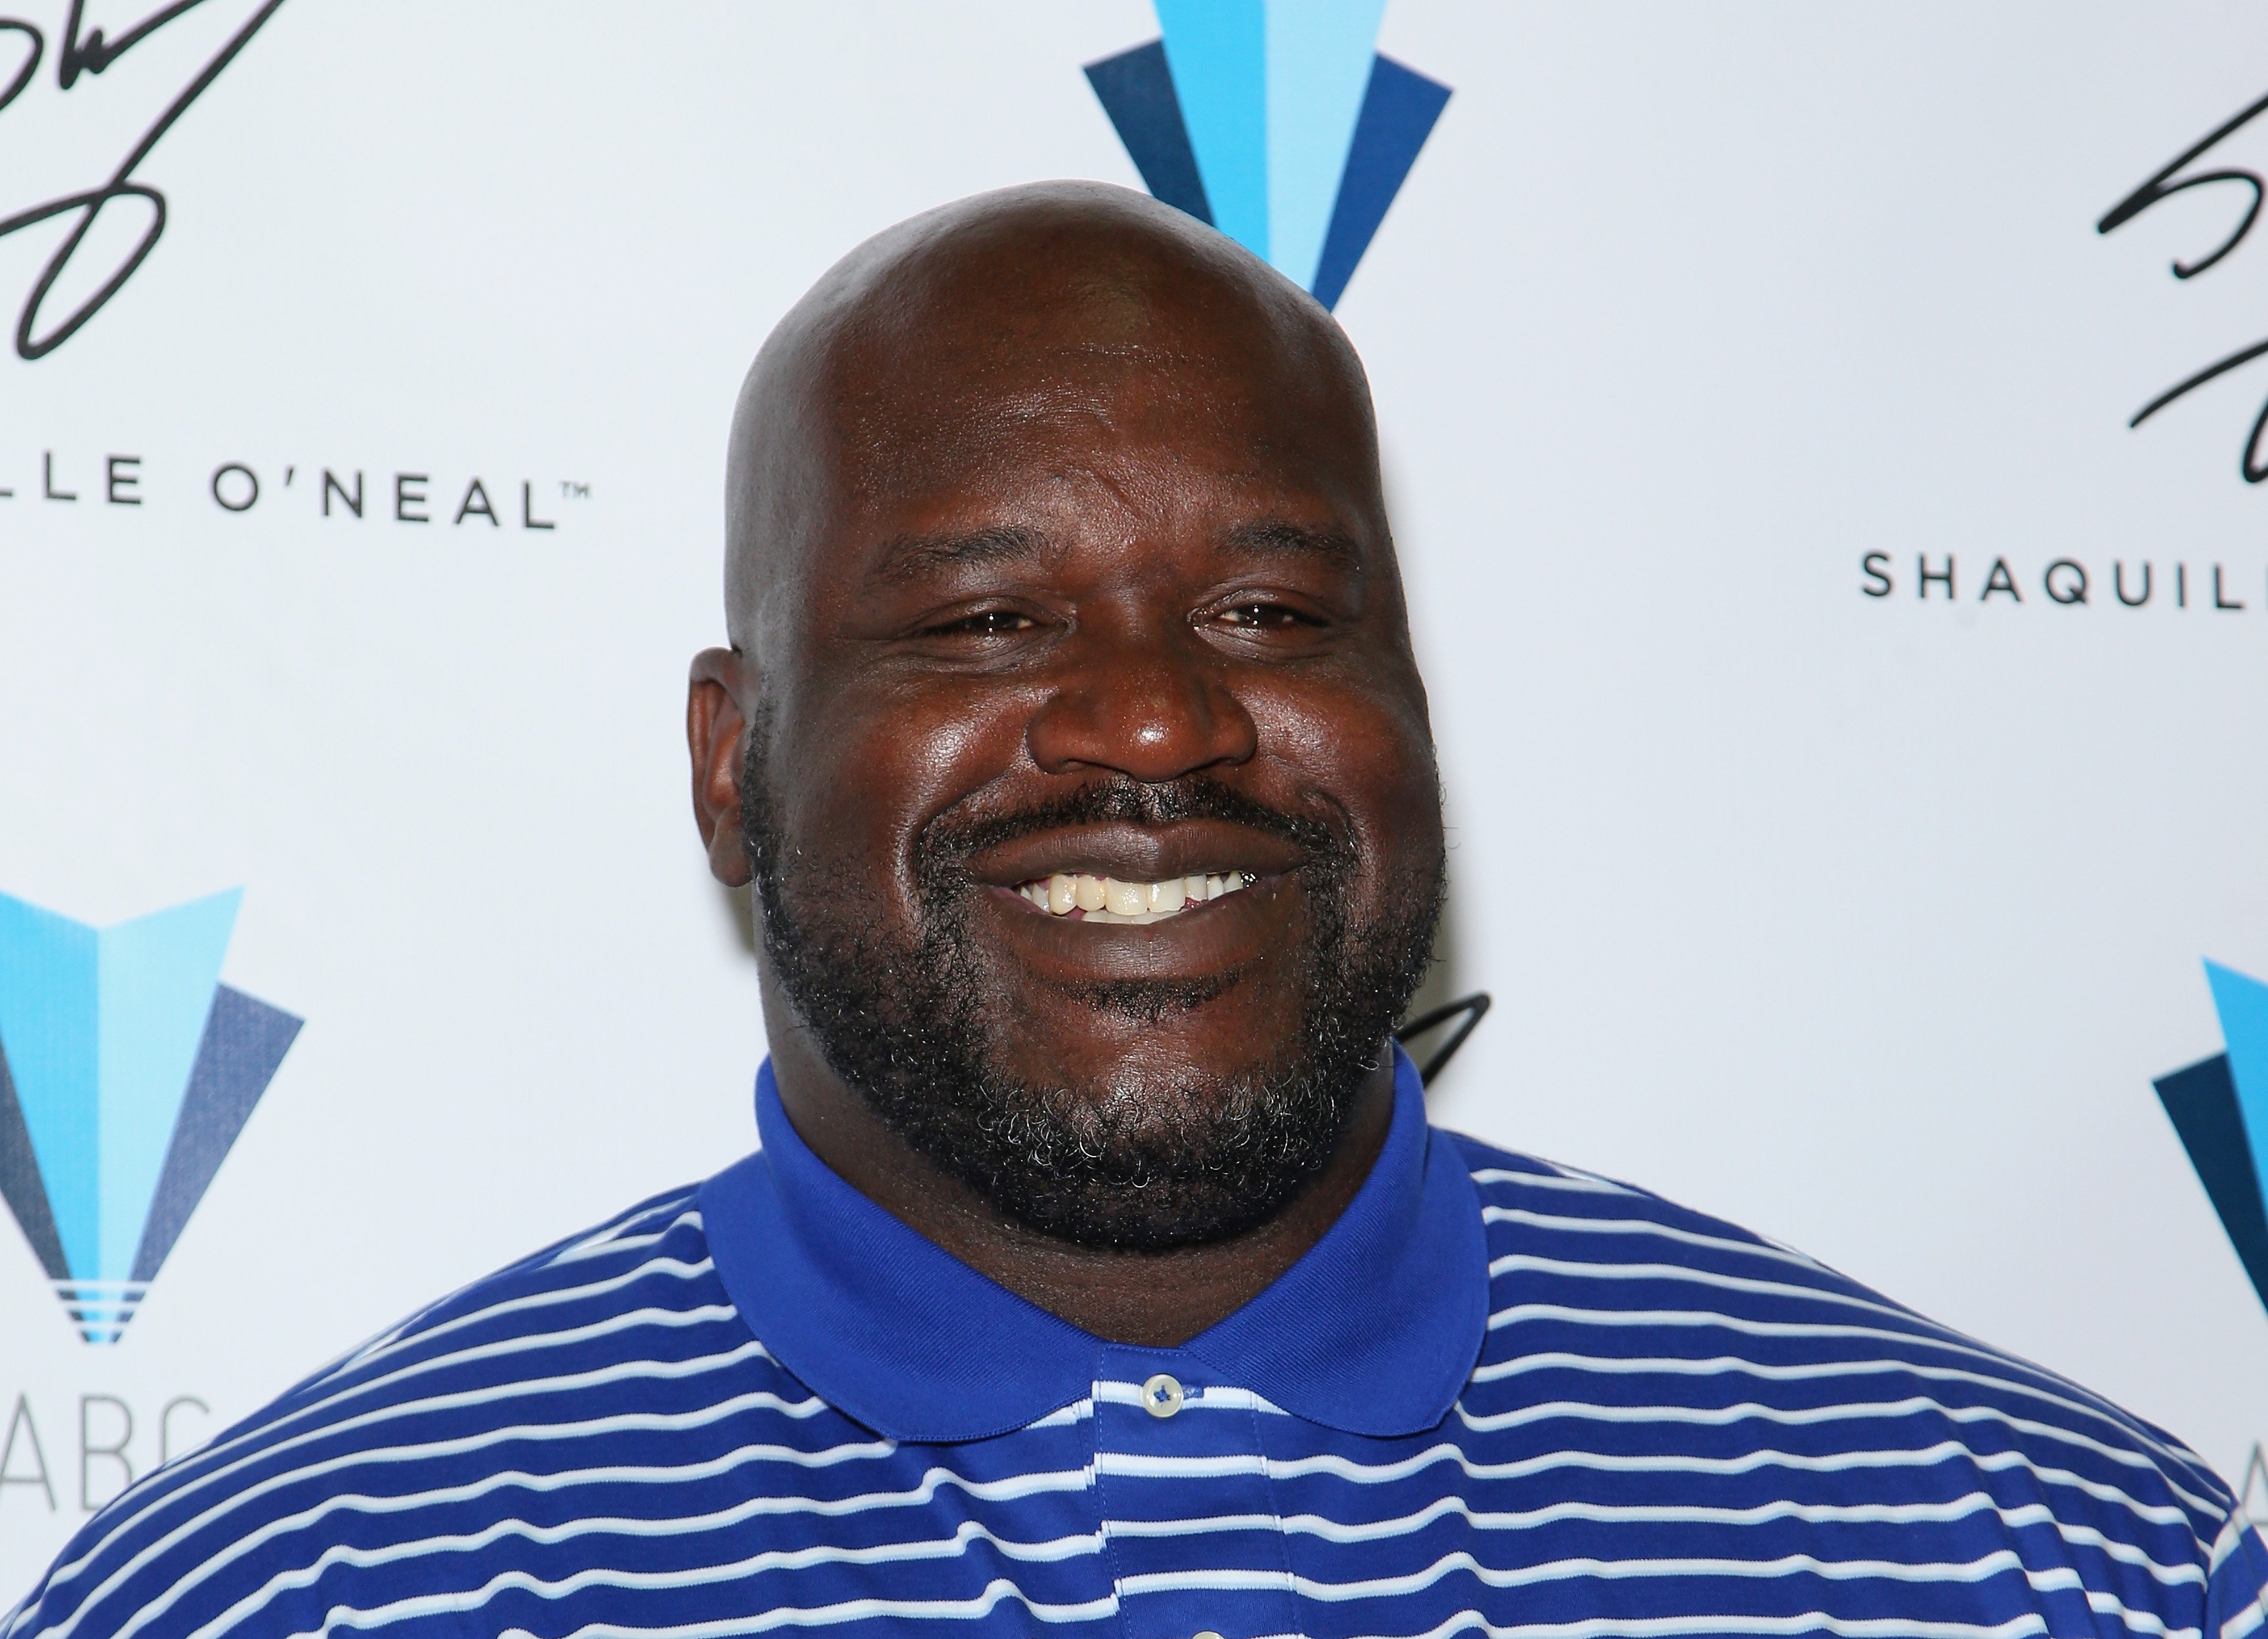 Shaquille O'Neal poses in the Authentic Brands Group booth during the Licensing Expo 2016 at the Mandalay Bay Convention Center on June 21, 2016. | Photo: Getty Images